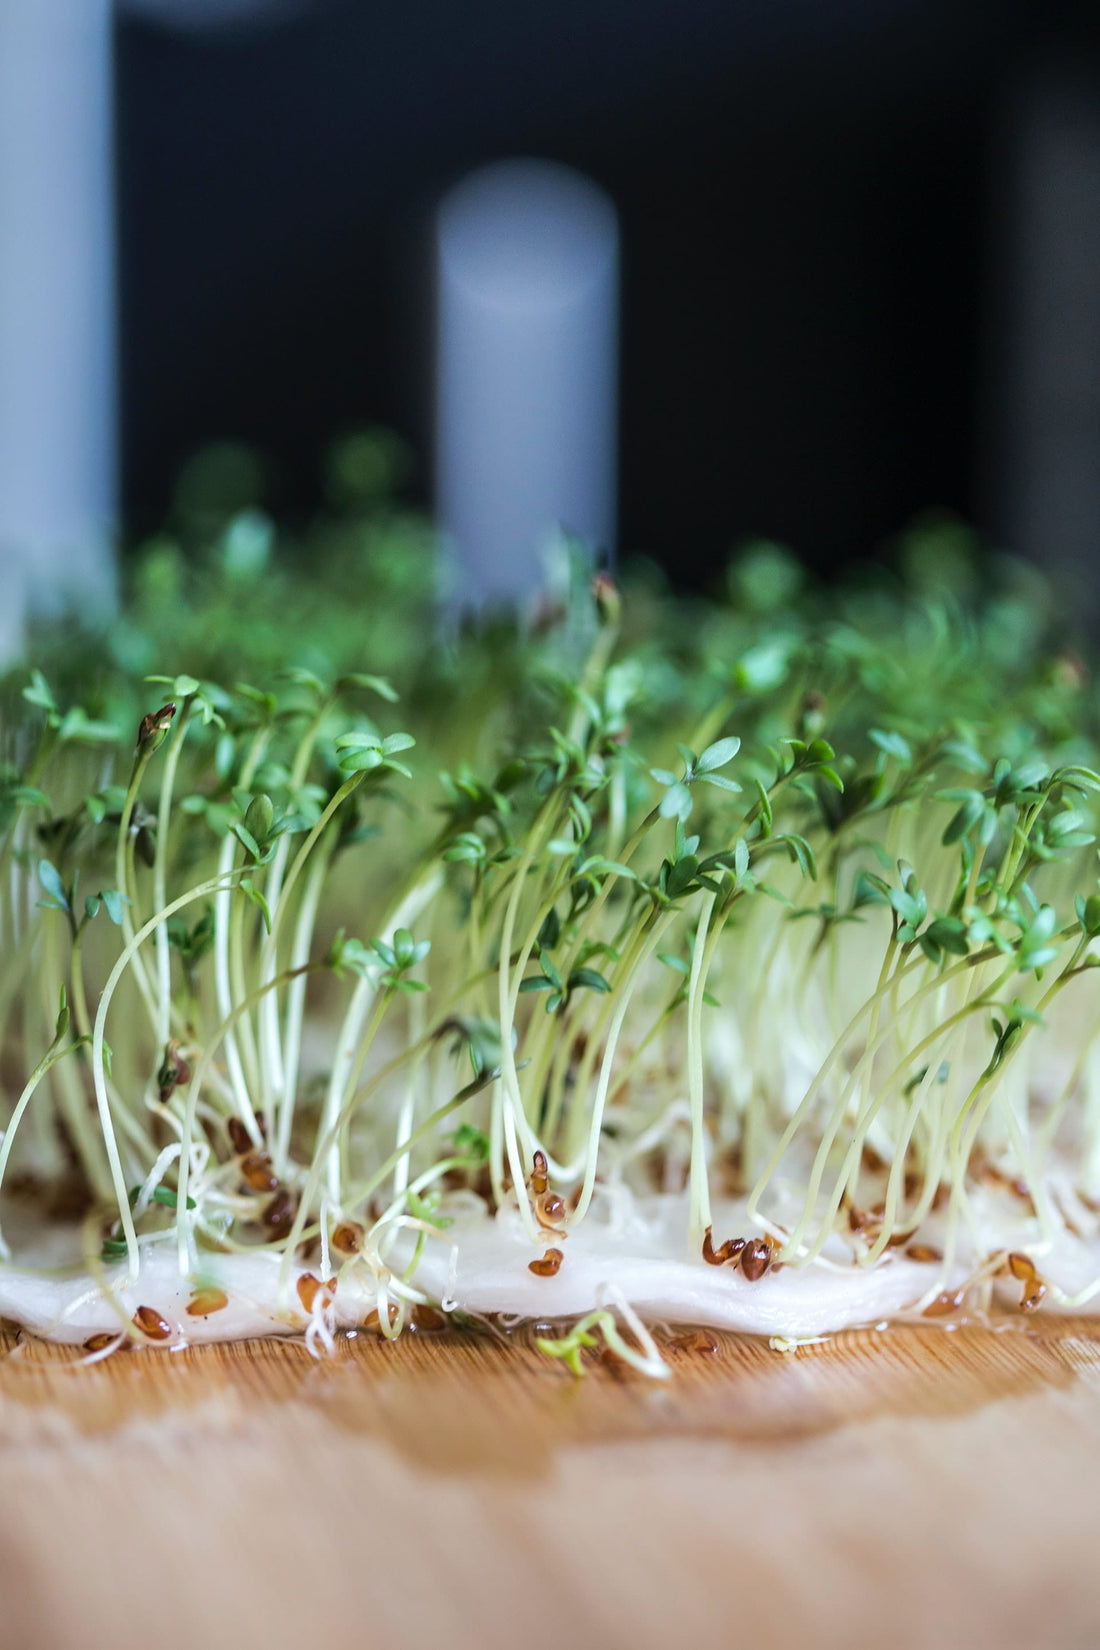 Why Choose Between Sprouts & Microgreens - Grow Both!